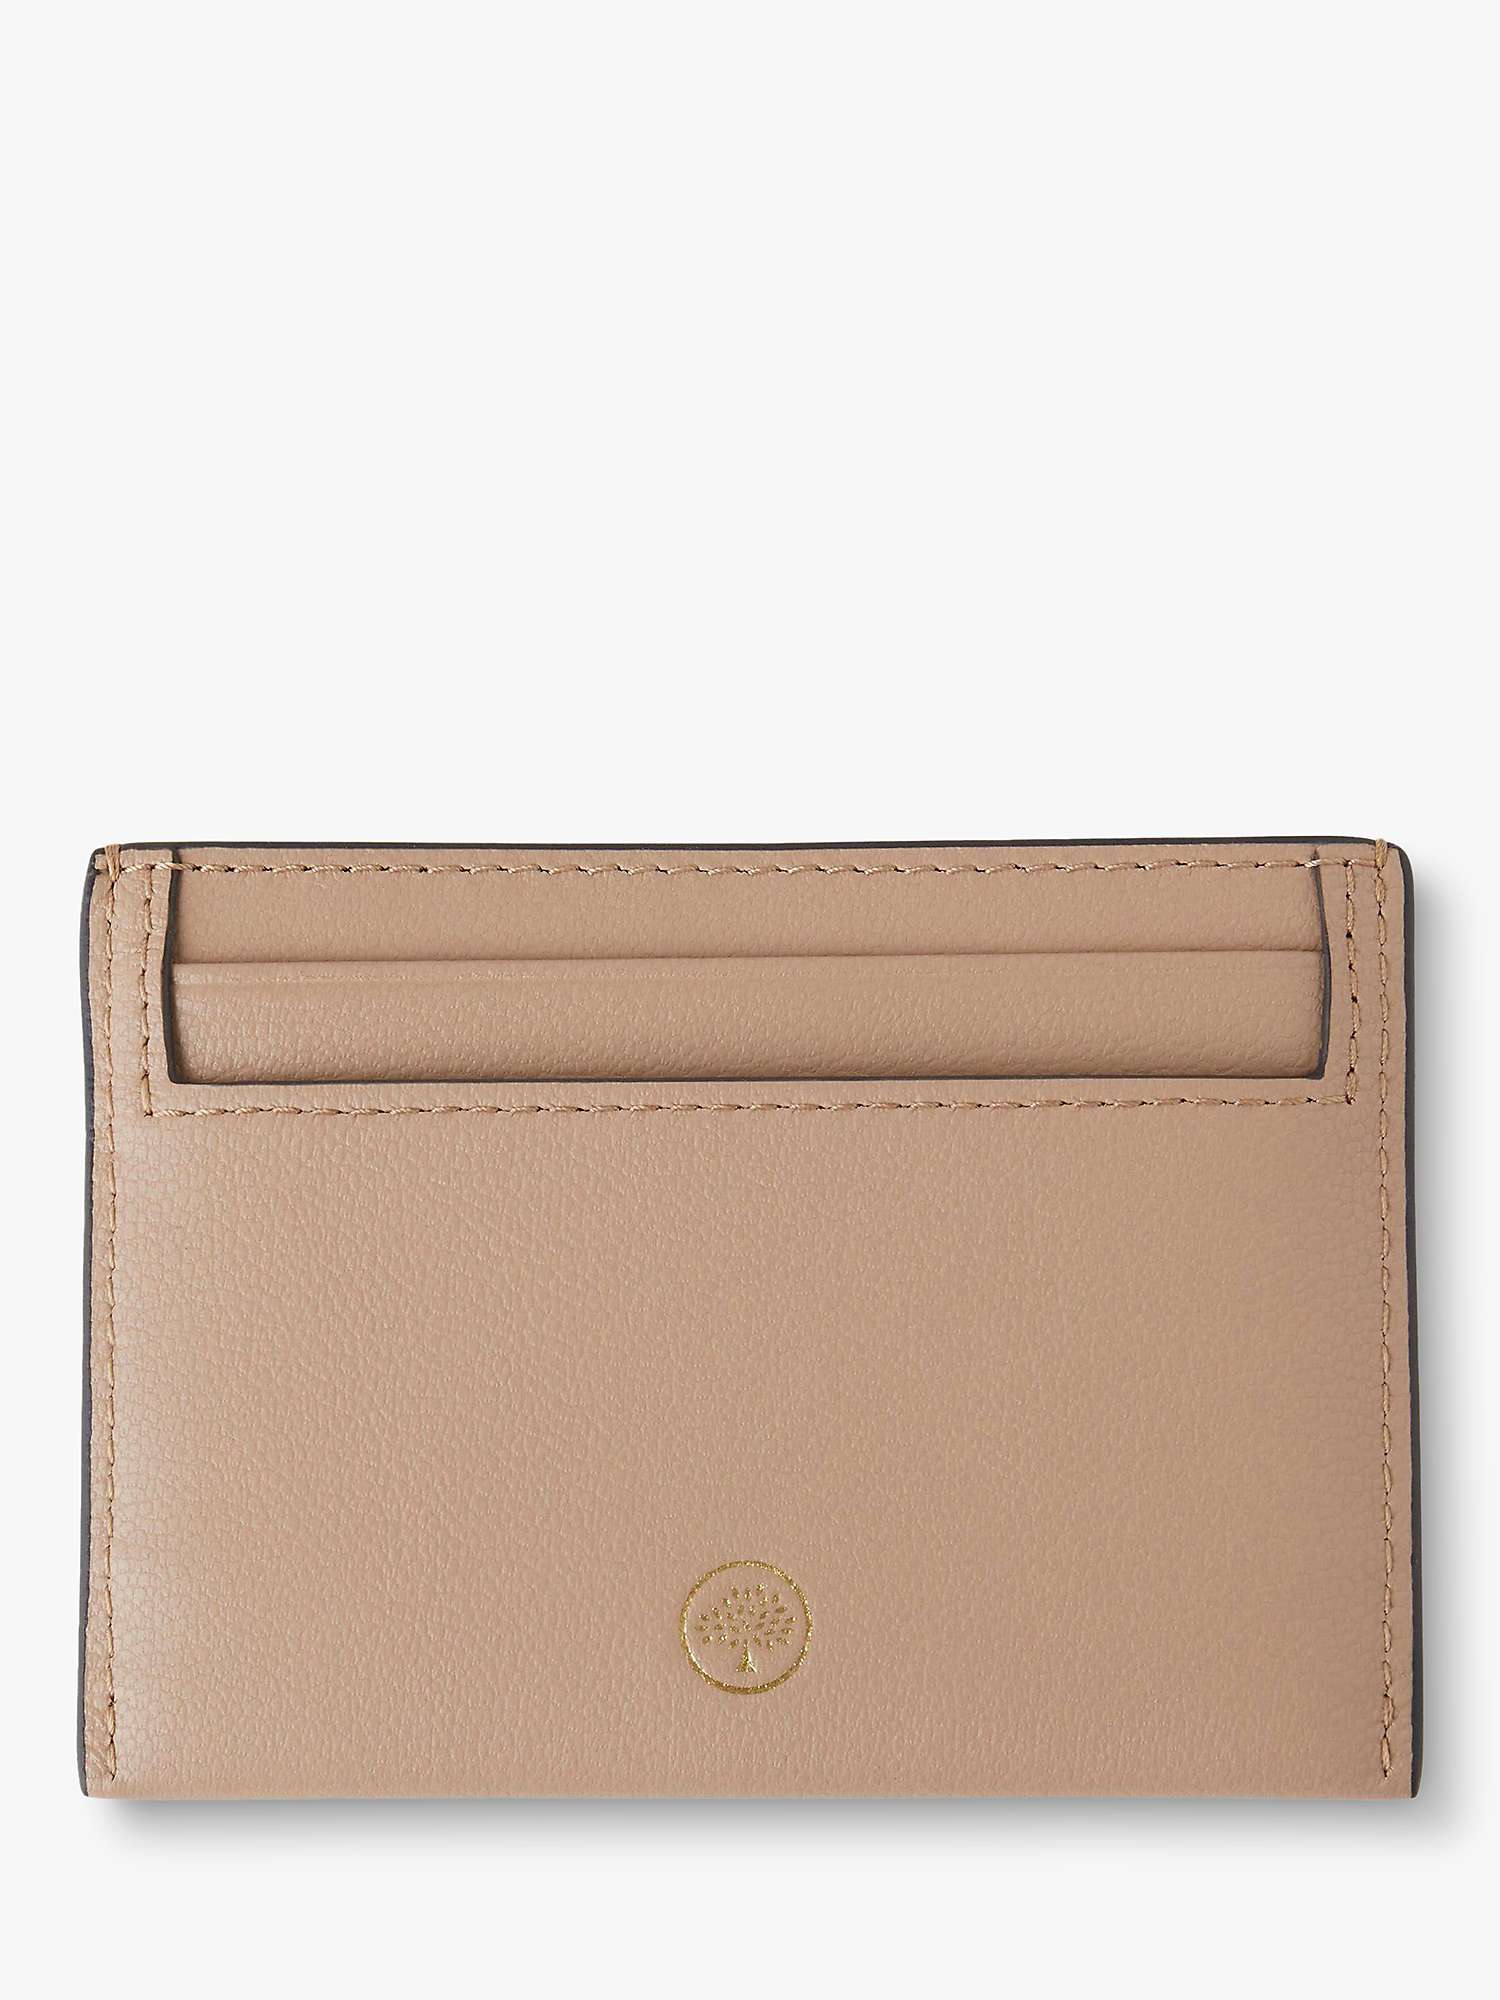 Buy Mulberry Continental Micro Classic Grain Card Slip Online at johnlewis.com